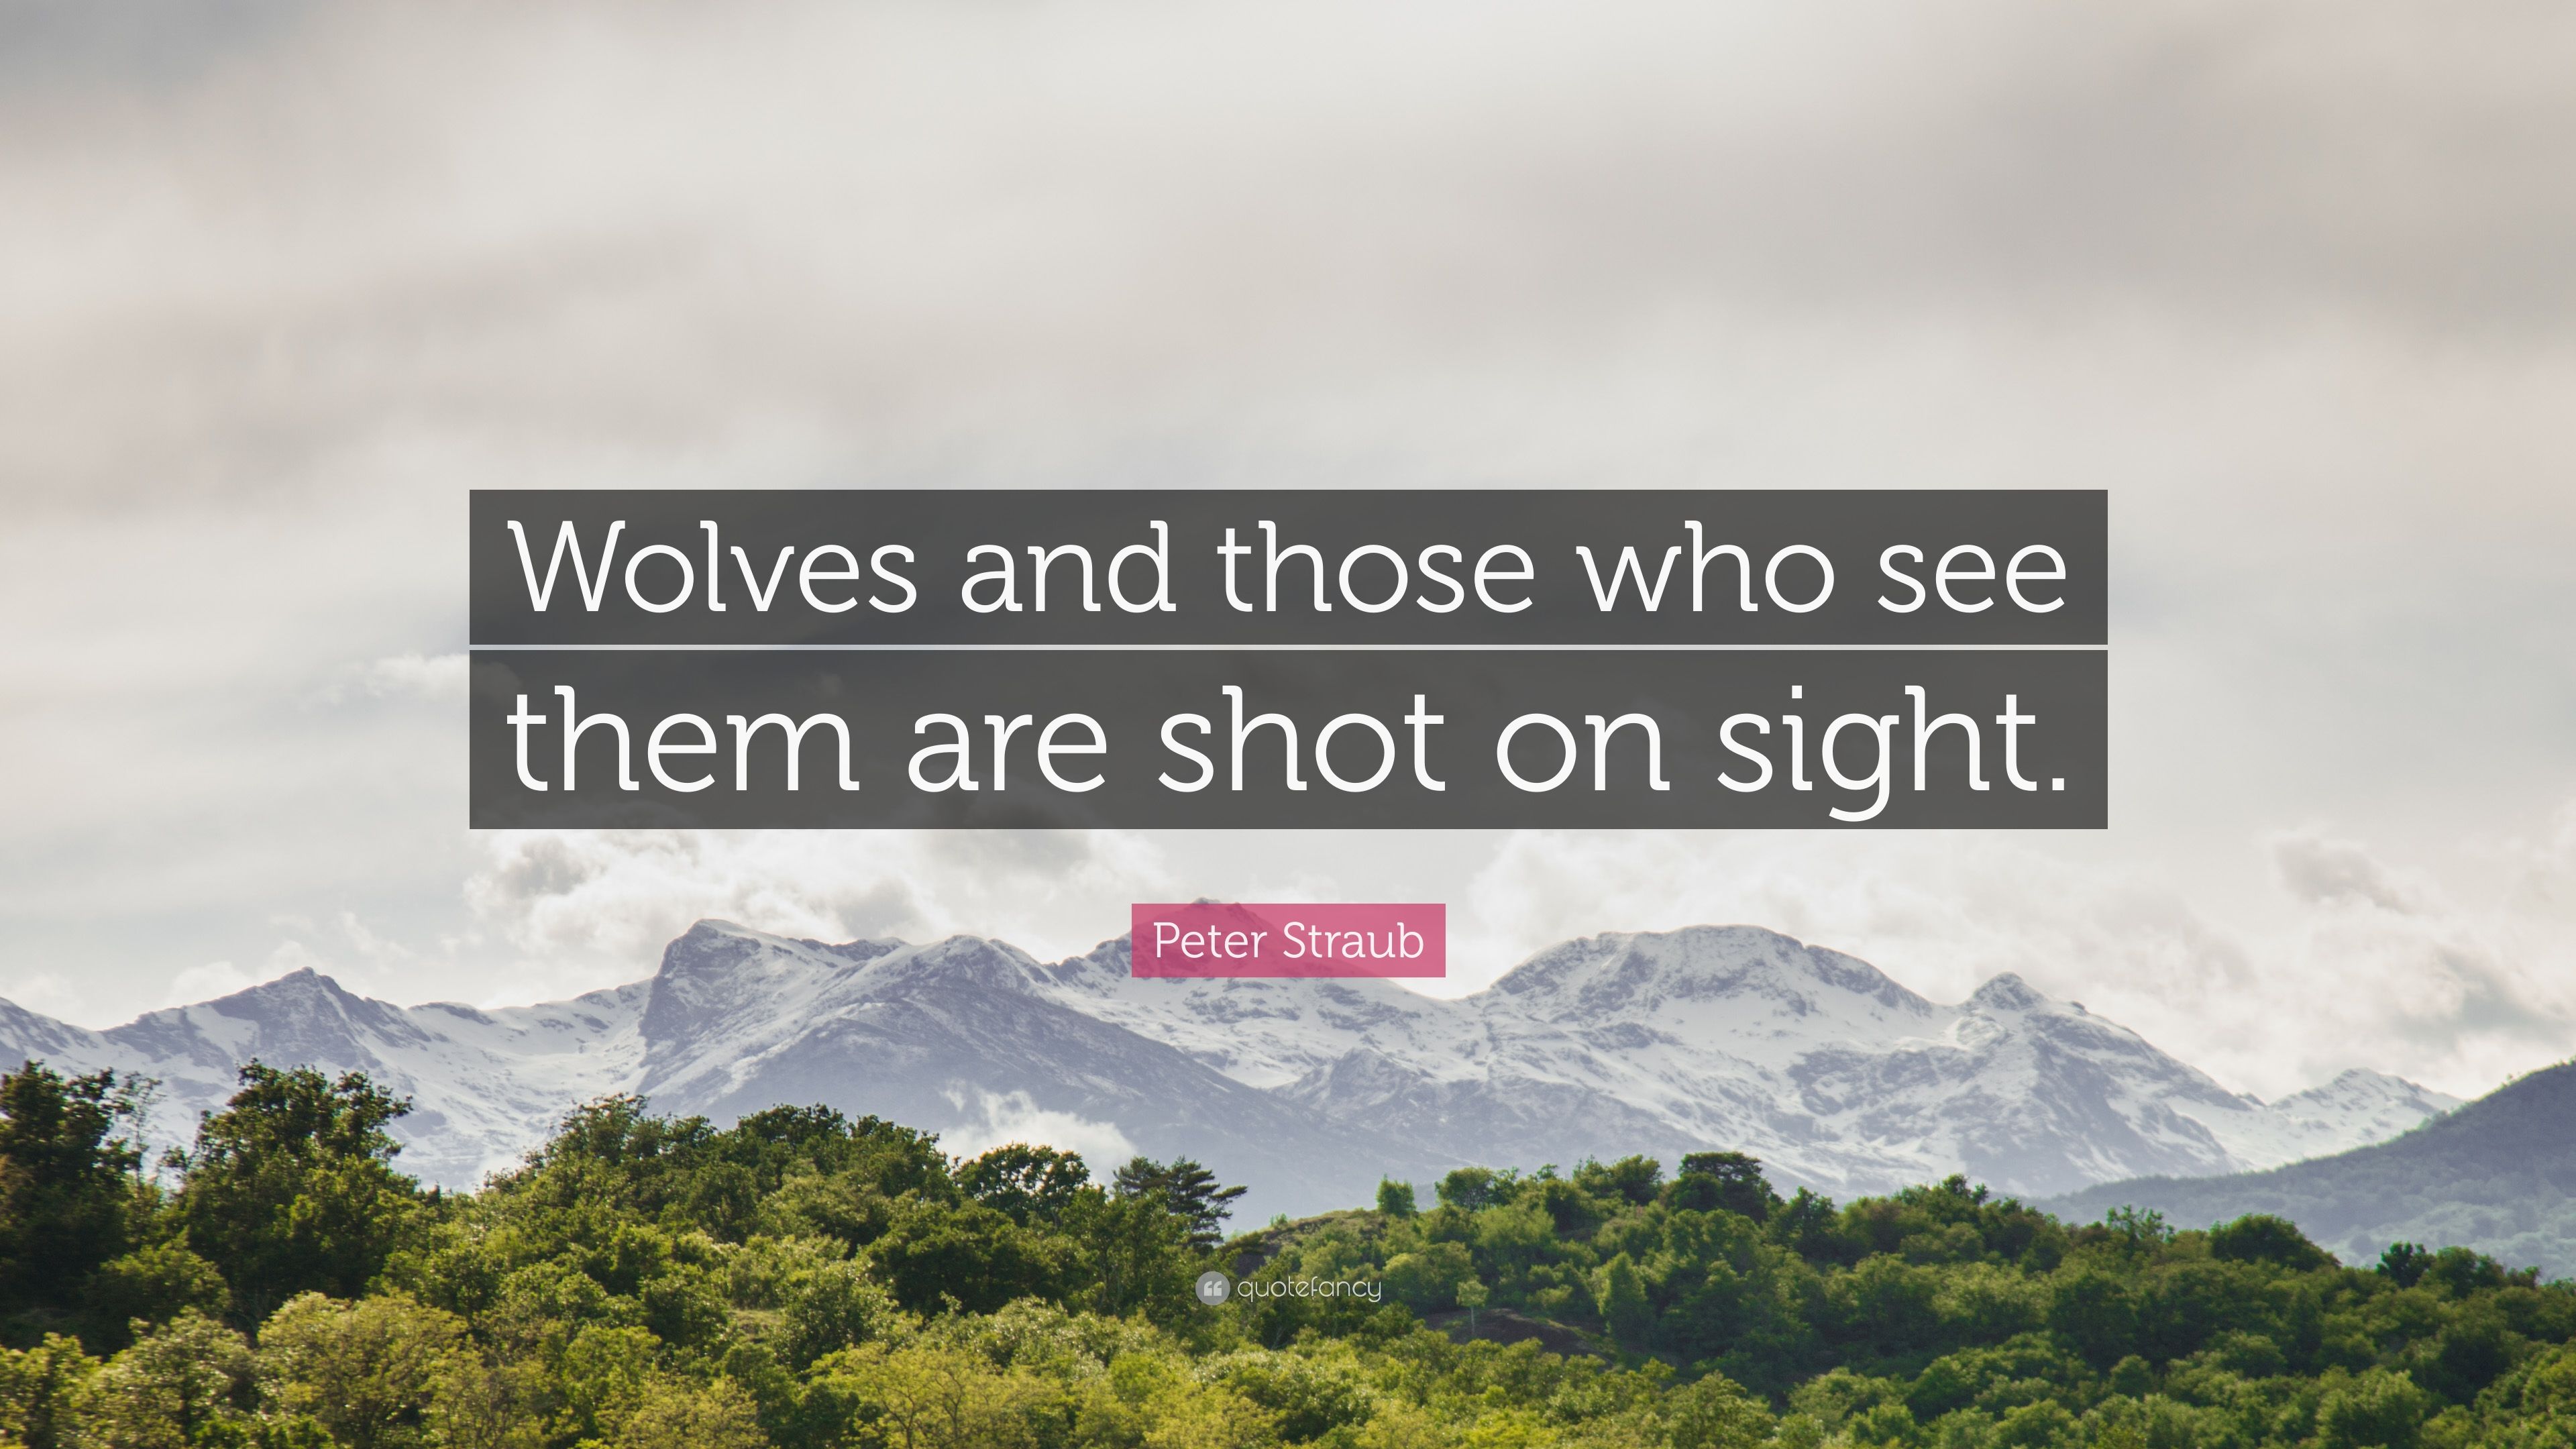 3371934-Peter-Straub-Quote-Wolves-and-those-who-see-them-are-shot-on-sight.jpg